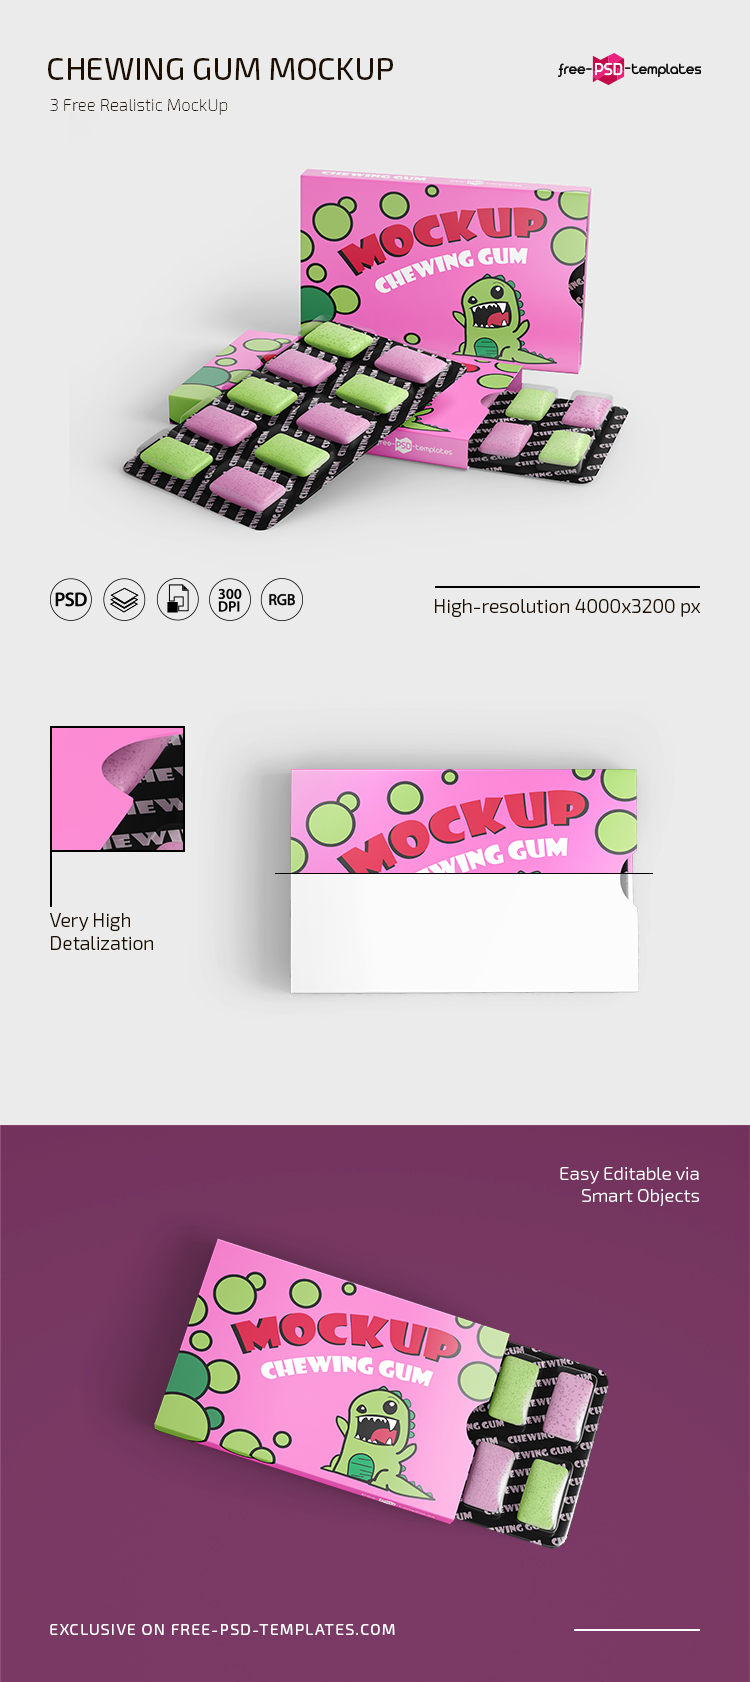 Download Free Chewing Gum Mockup Templates in PSD | Free PSD Templates